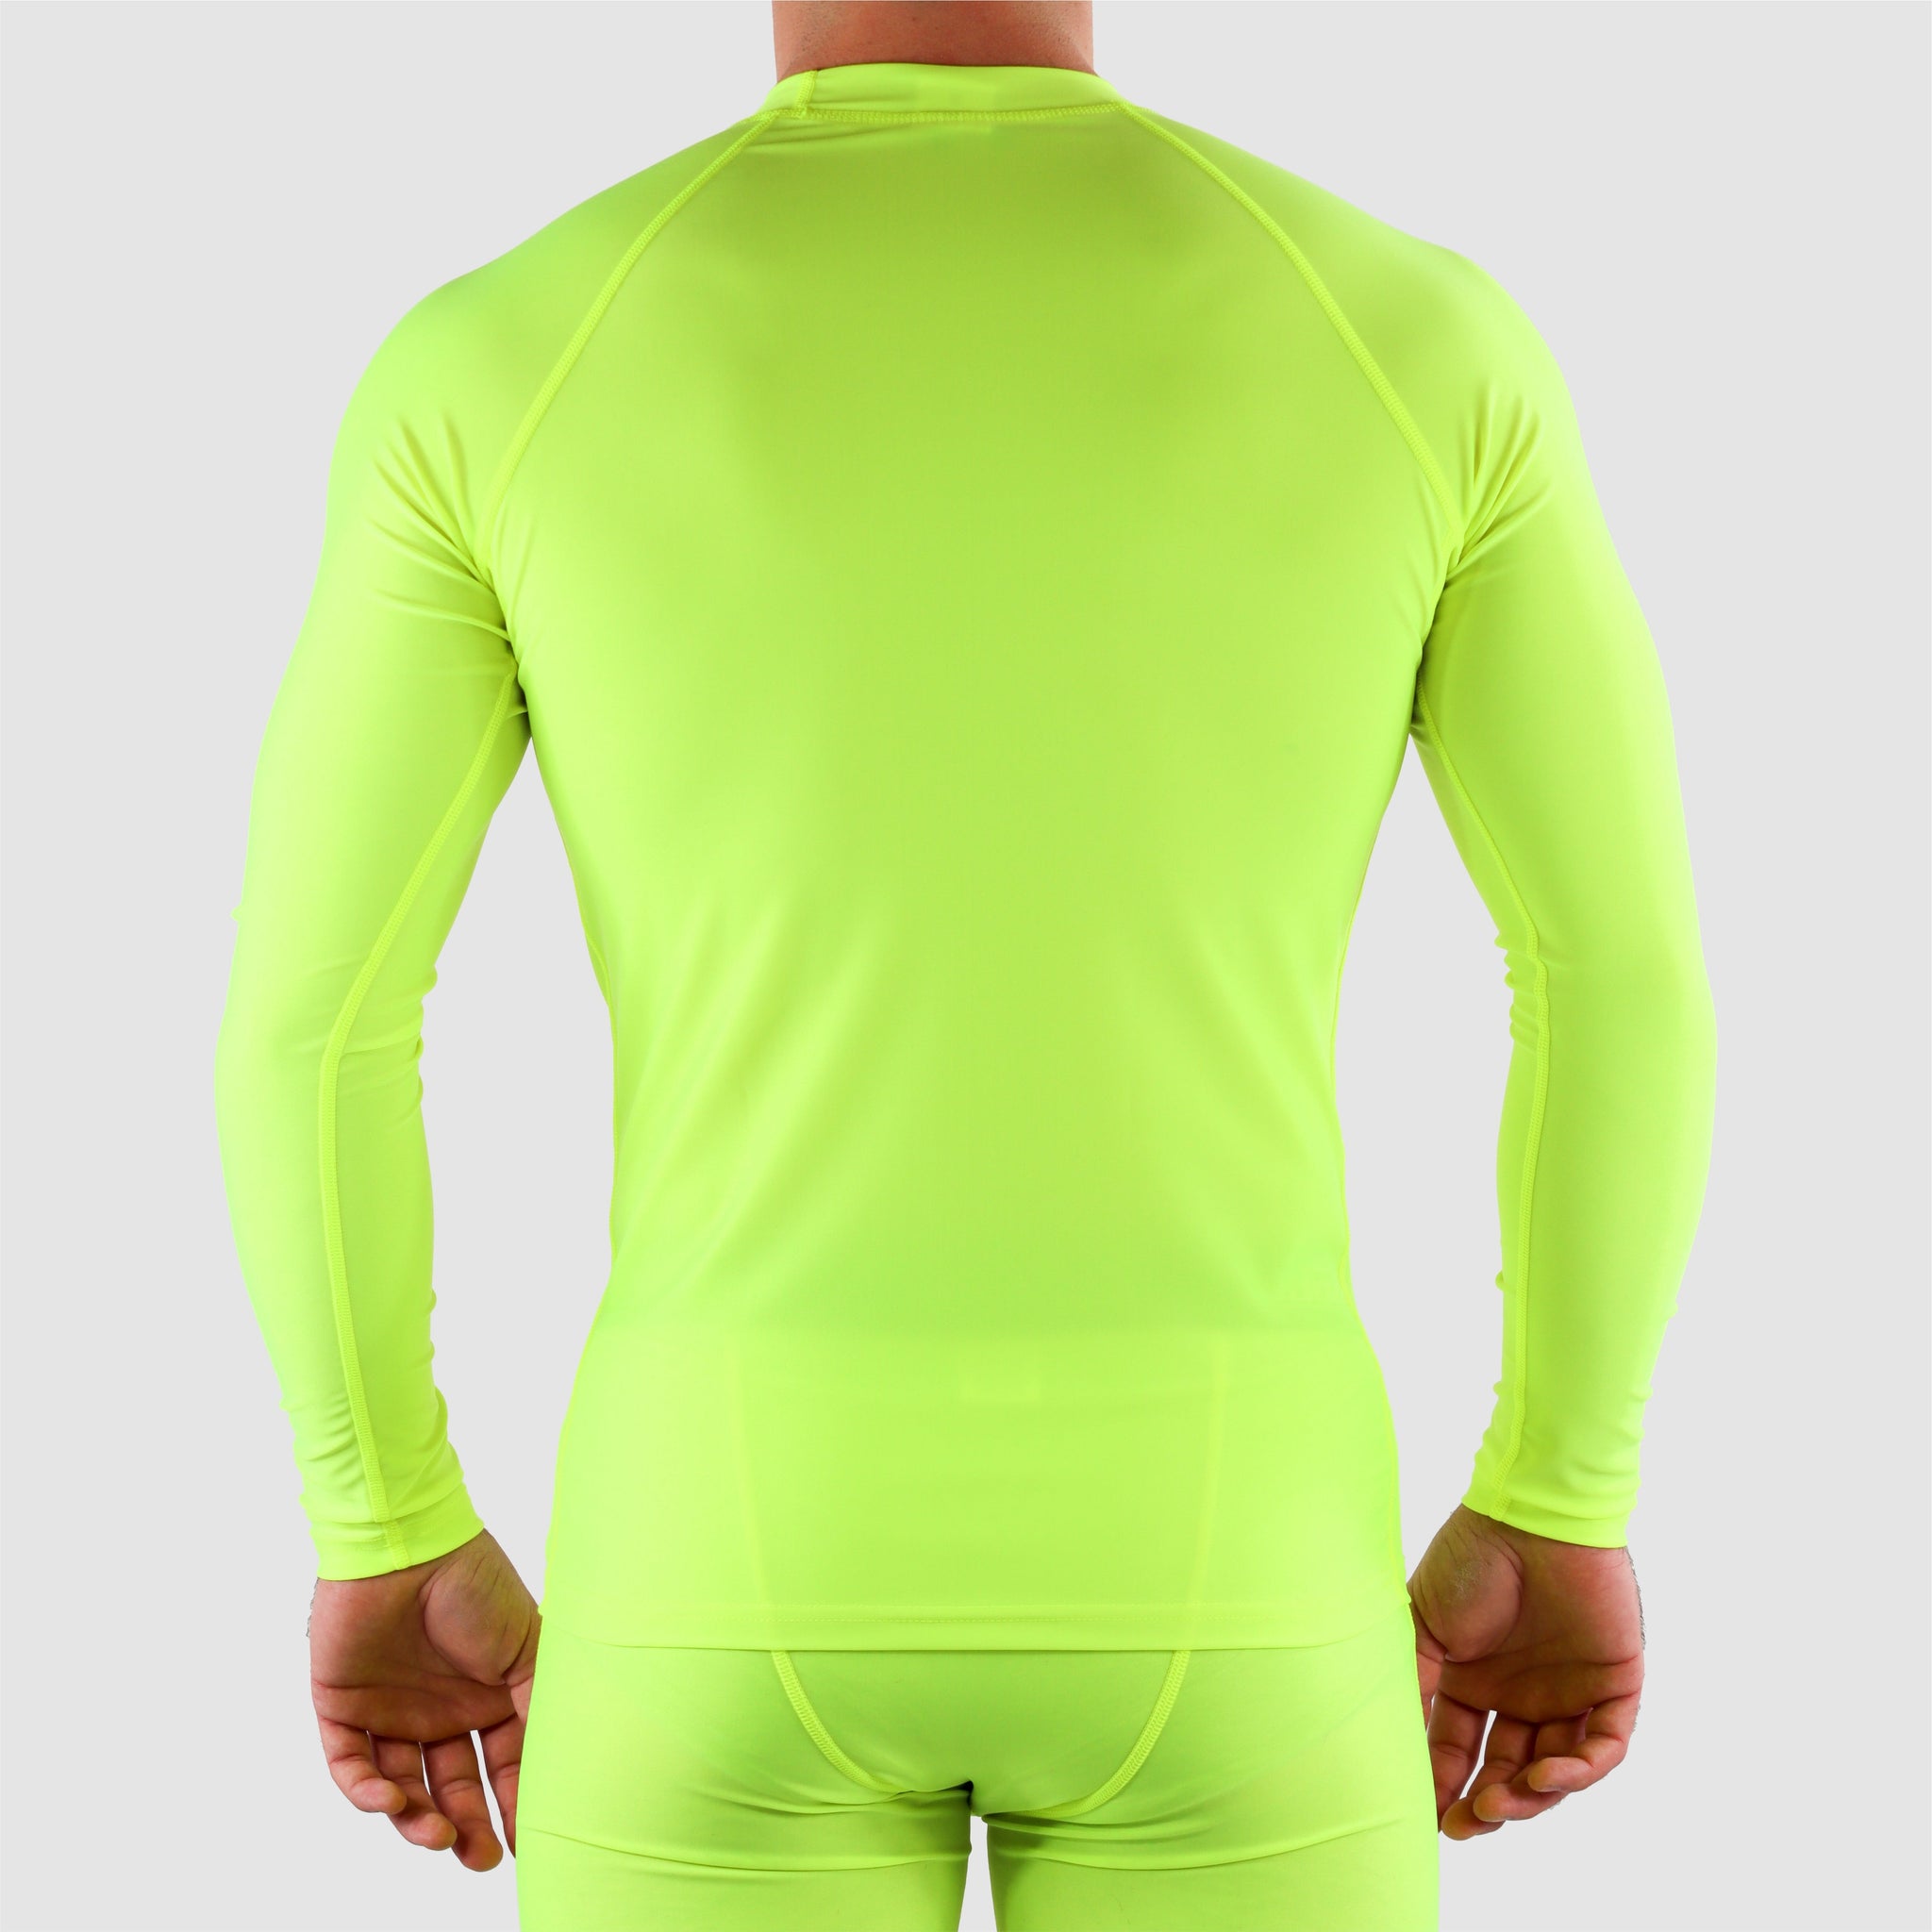 Fluorescent Yellow DiDOO Men's Compression Baselayer Top Long Sleeve